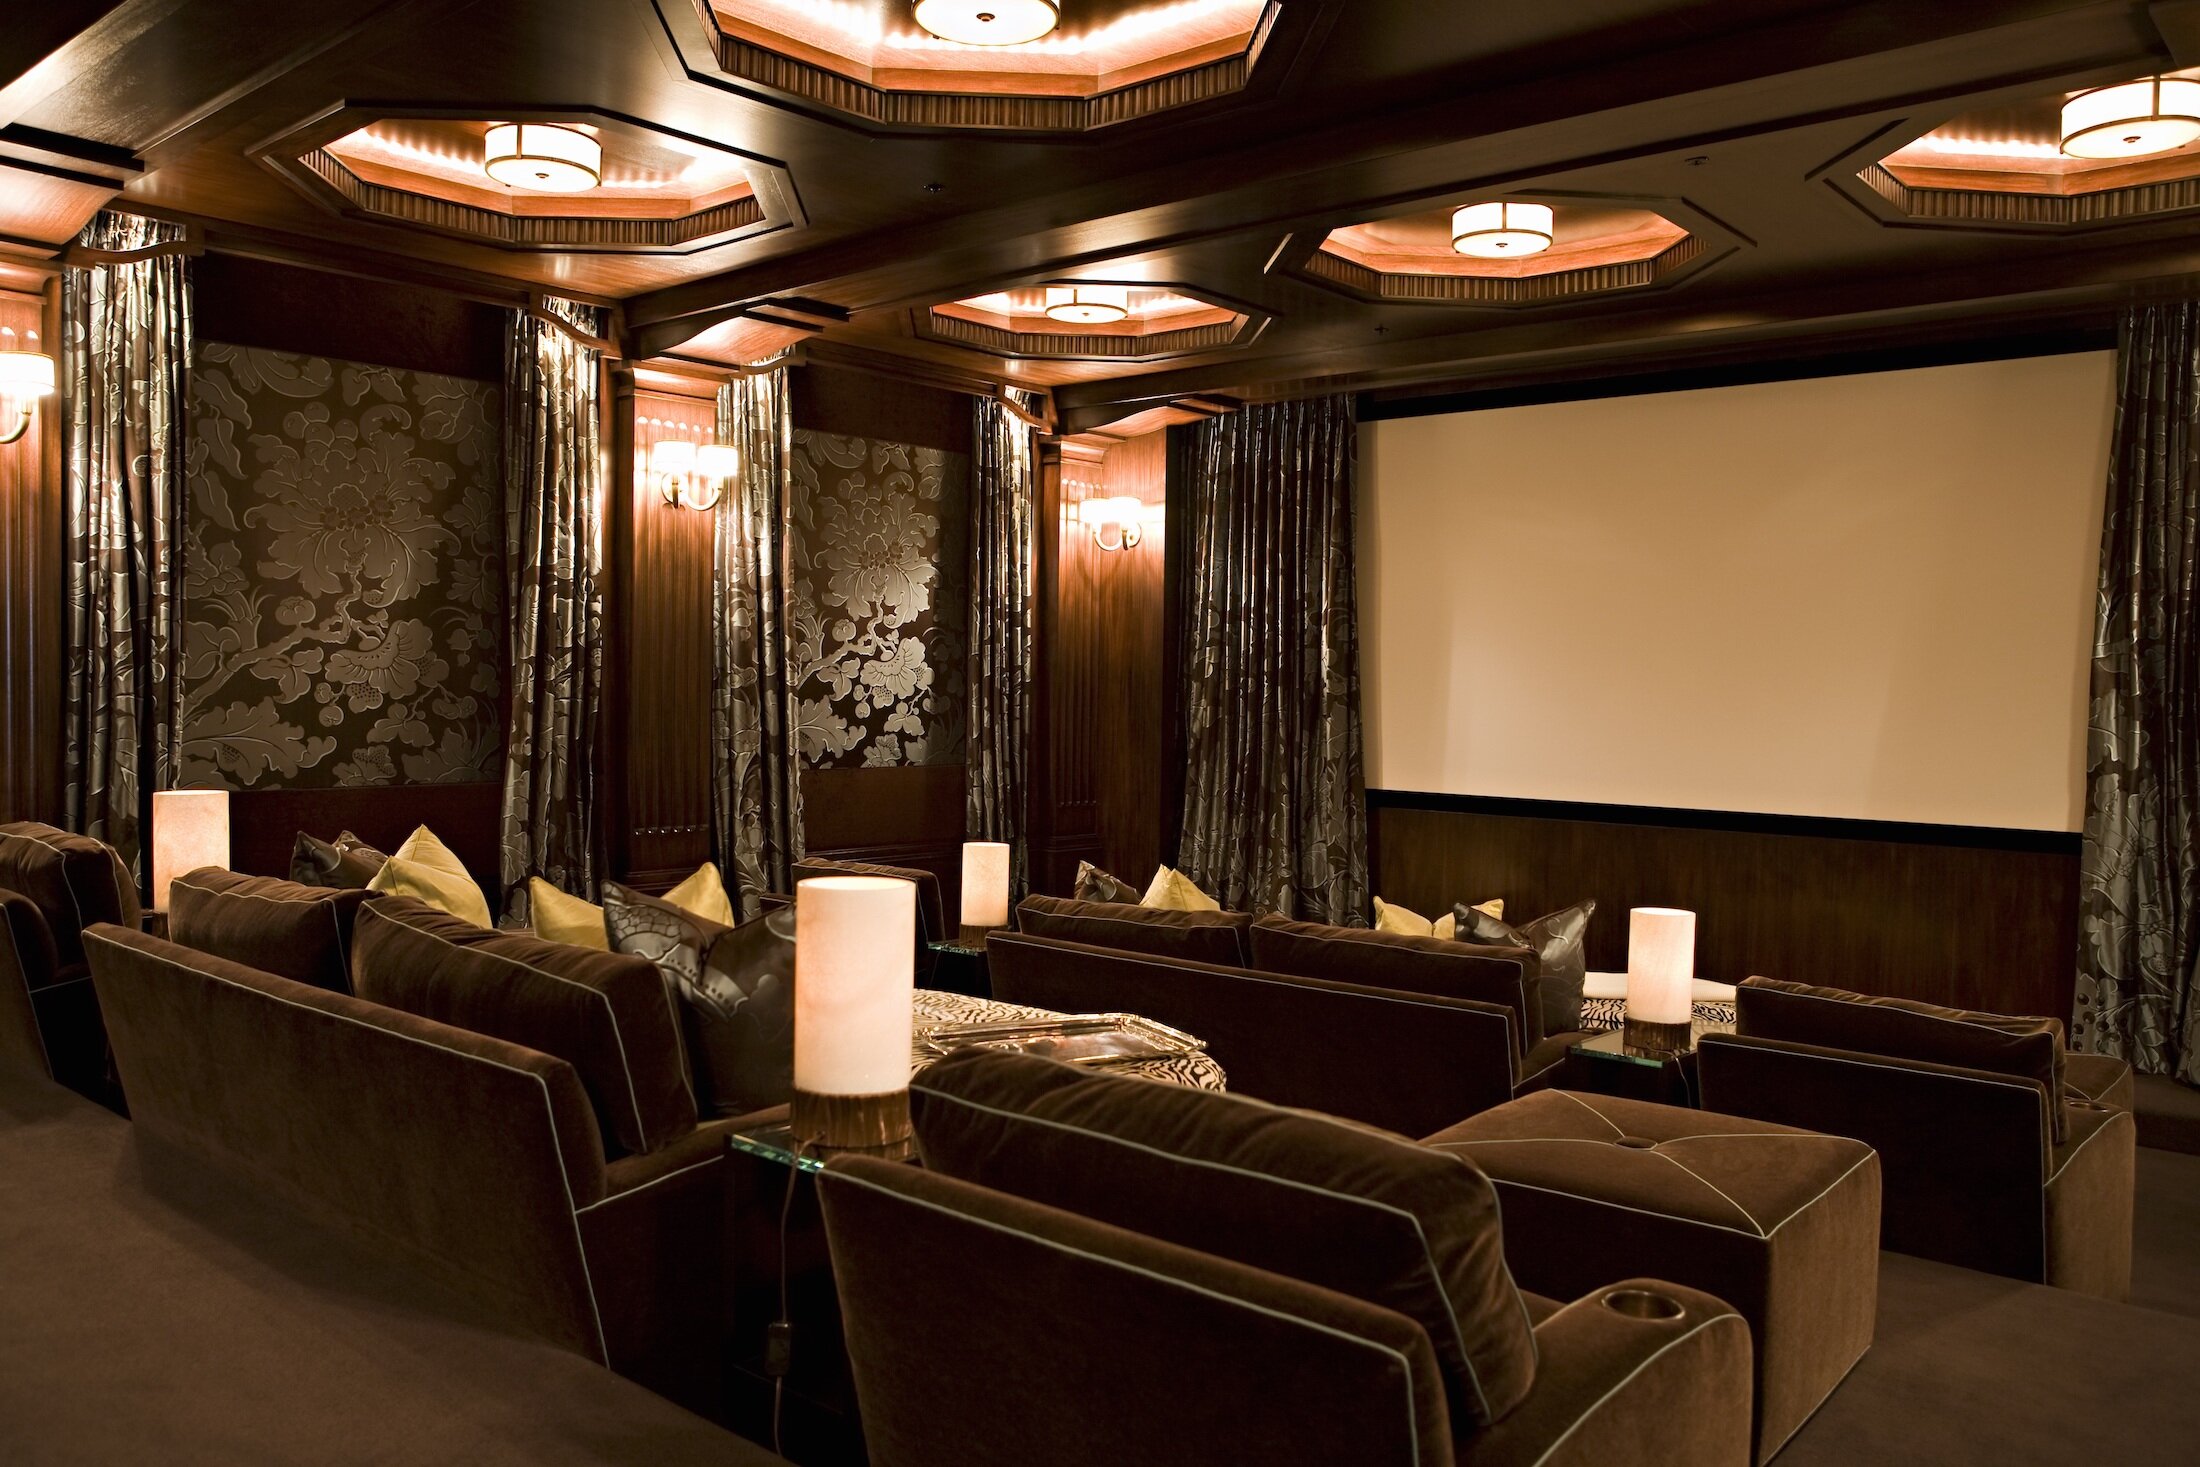 Theater Room with upholstered seating, upholstery walls, custom drapery and a large movie screen